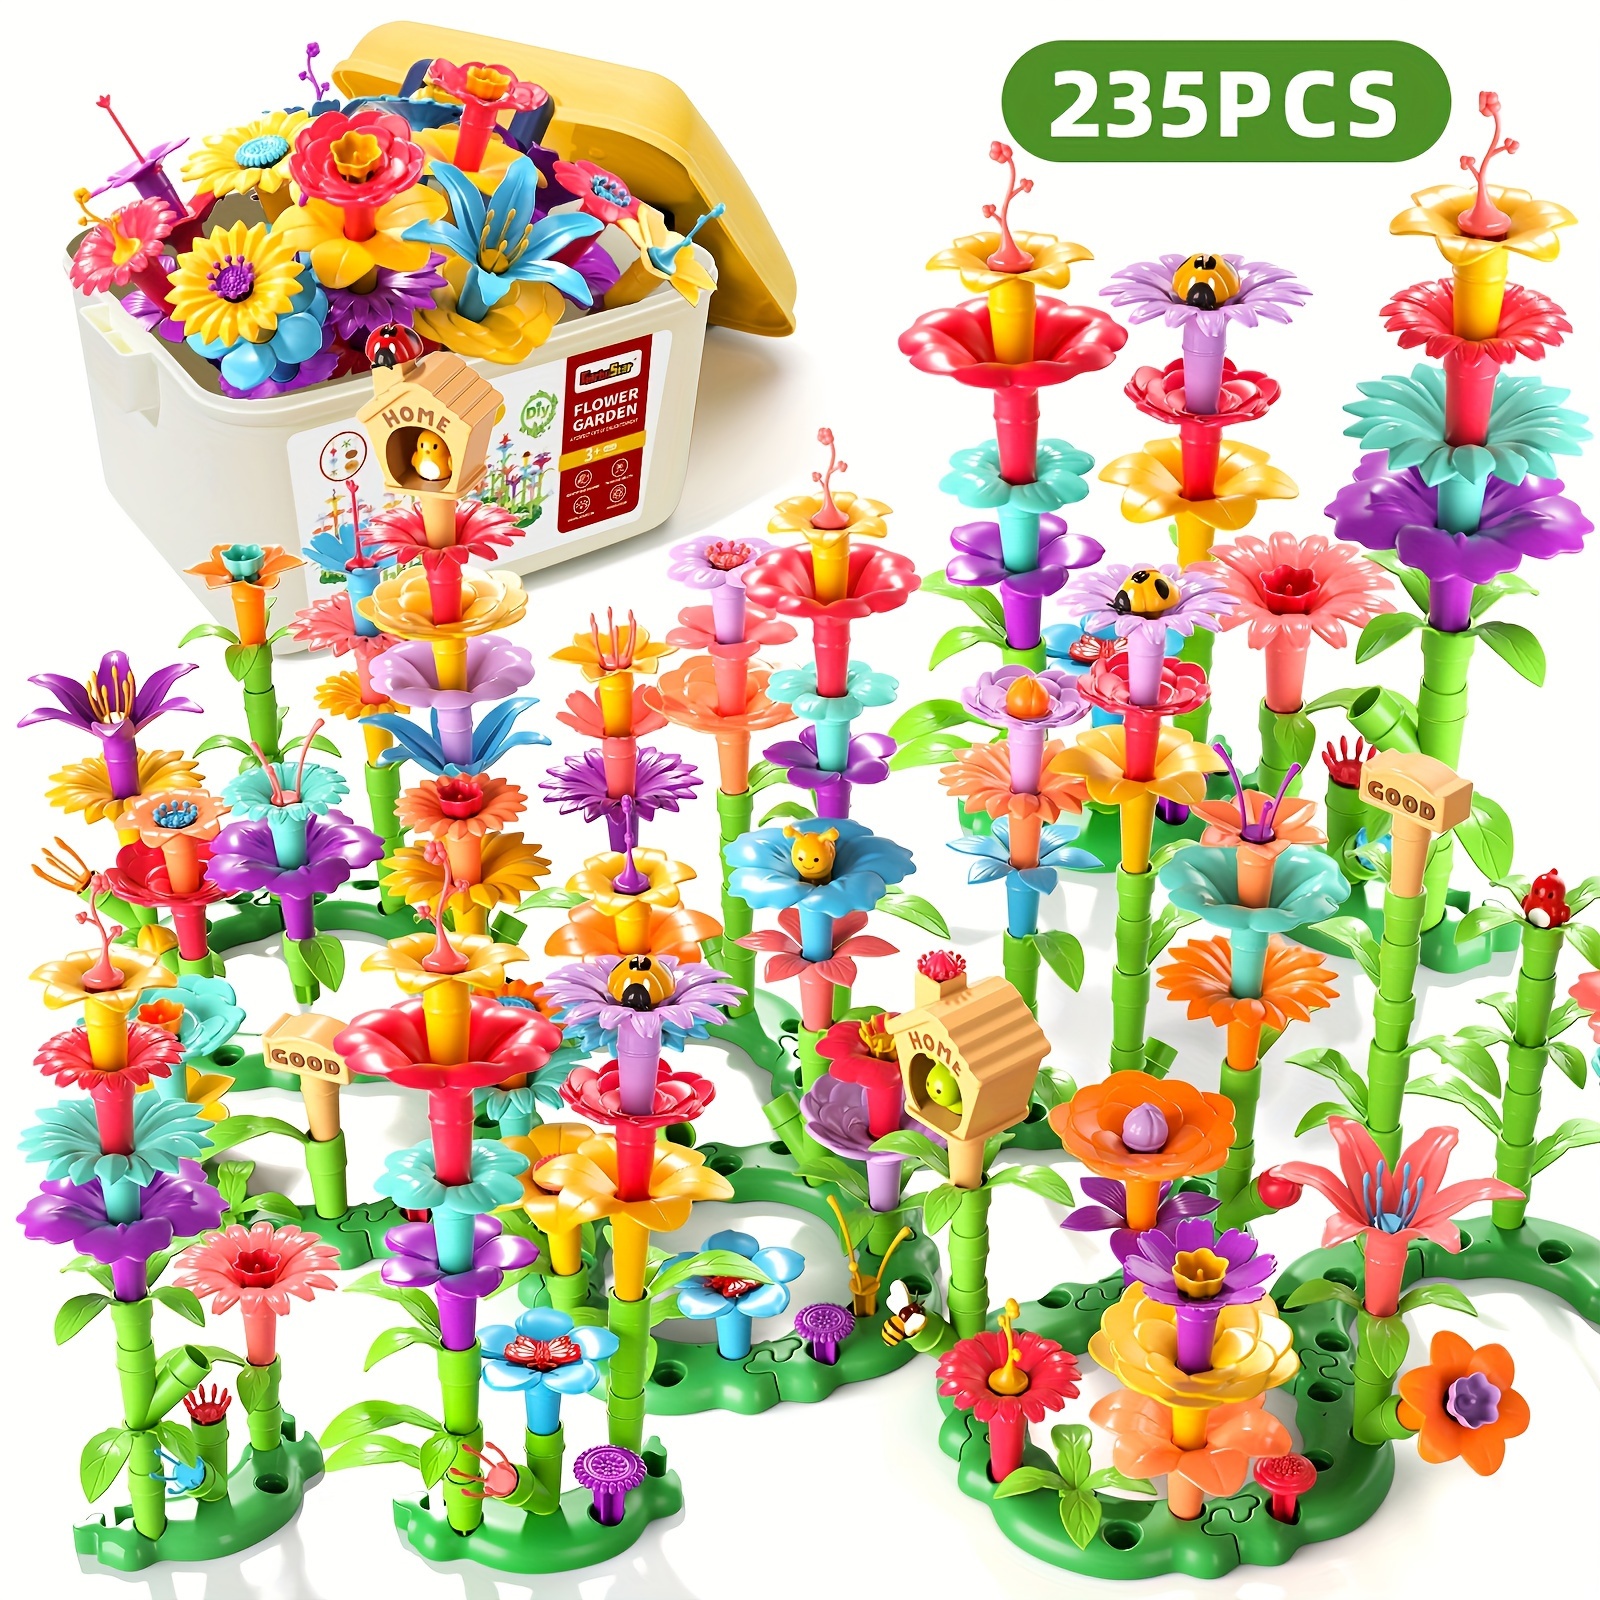 

Flower Garden Building Toys For 2 3 4 5 6 Year Old Girls, Educational Activity Preschool Birthday Gifts, Stem Toys For Kids Toddlers Ages 1-3 3-5